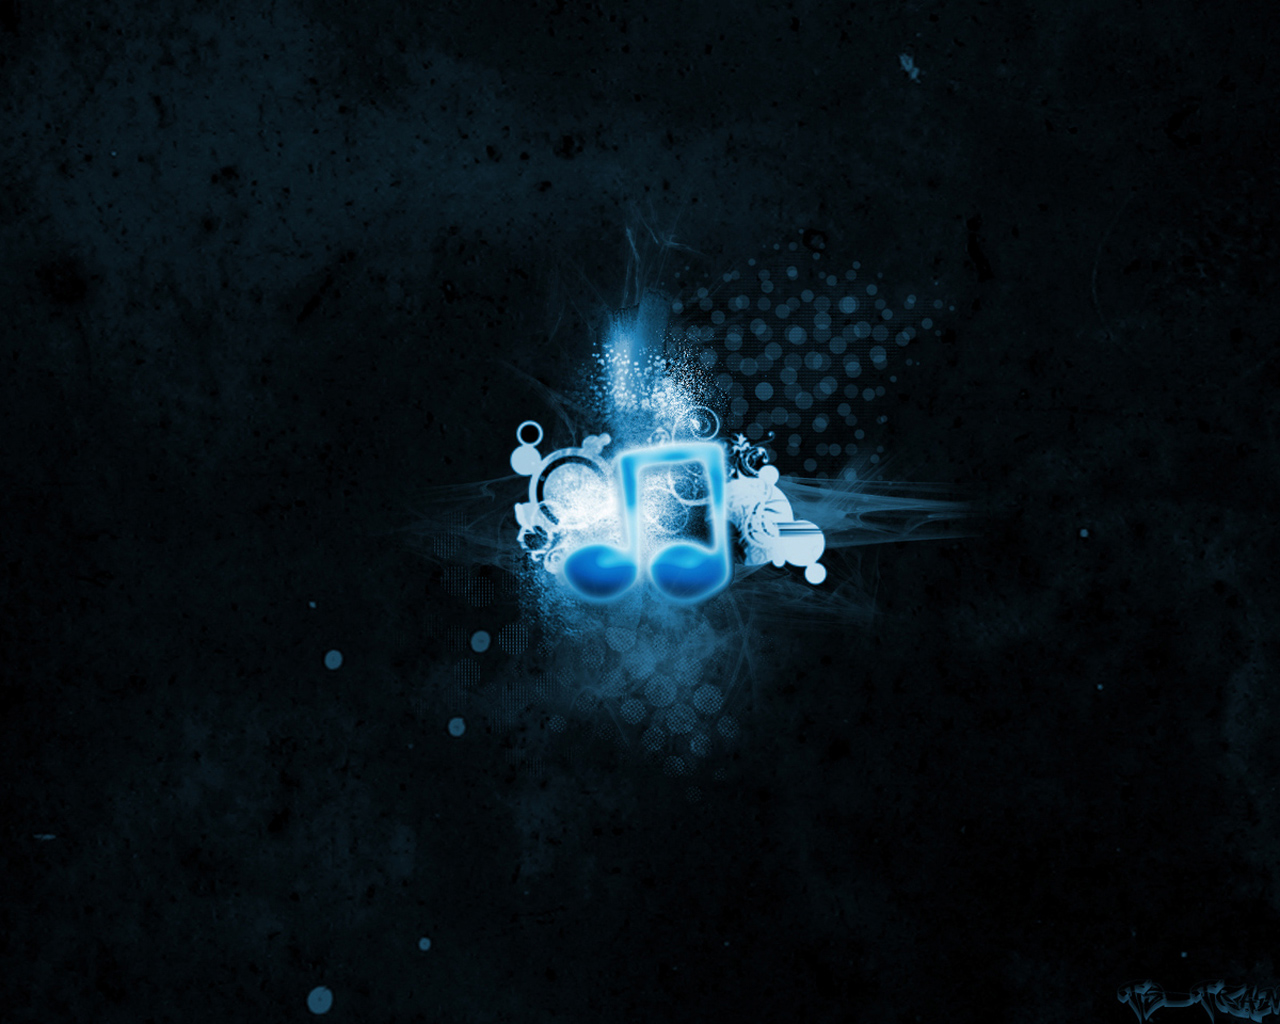 music related wallpapers,space,screenshot,darkness,graphics,graphic design